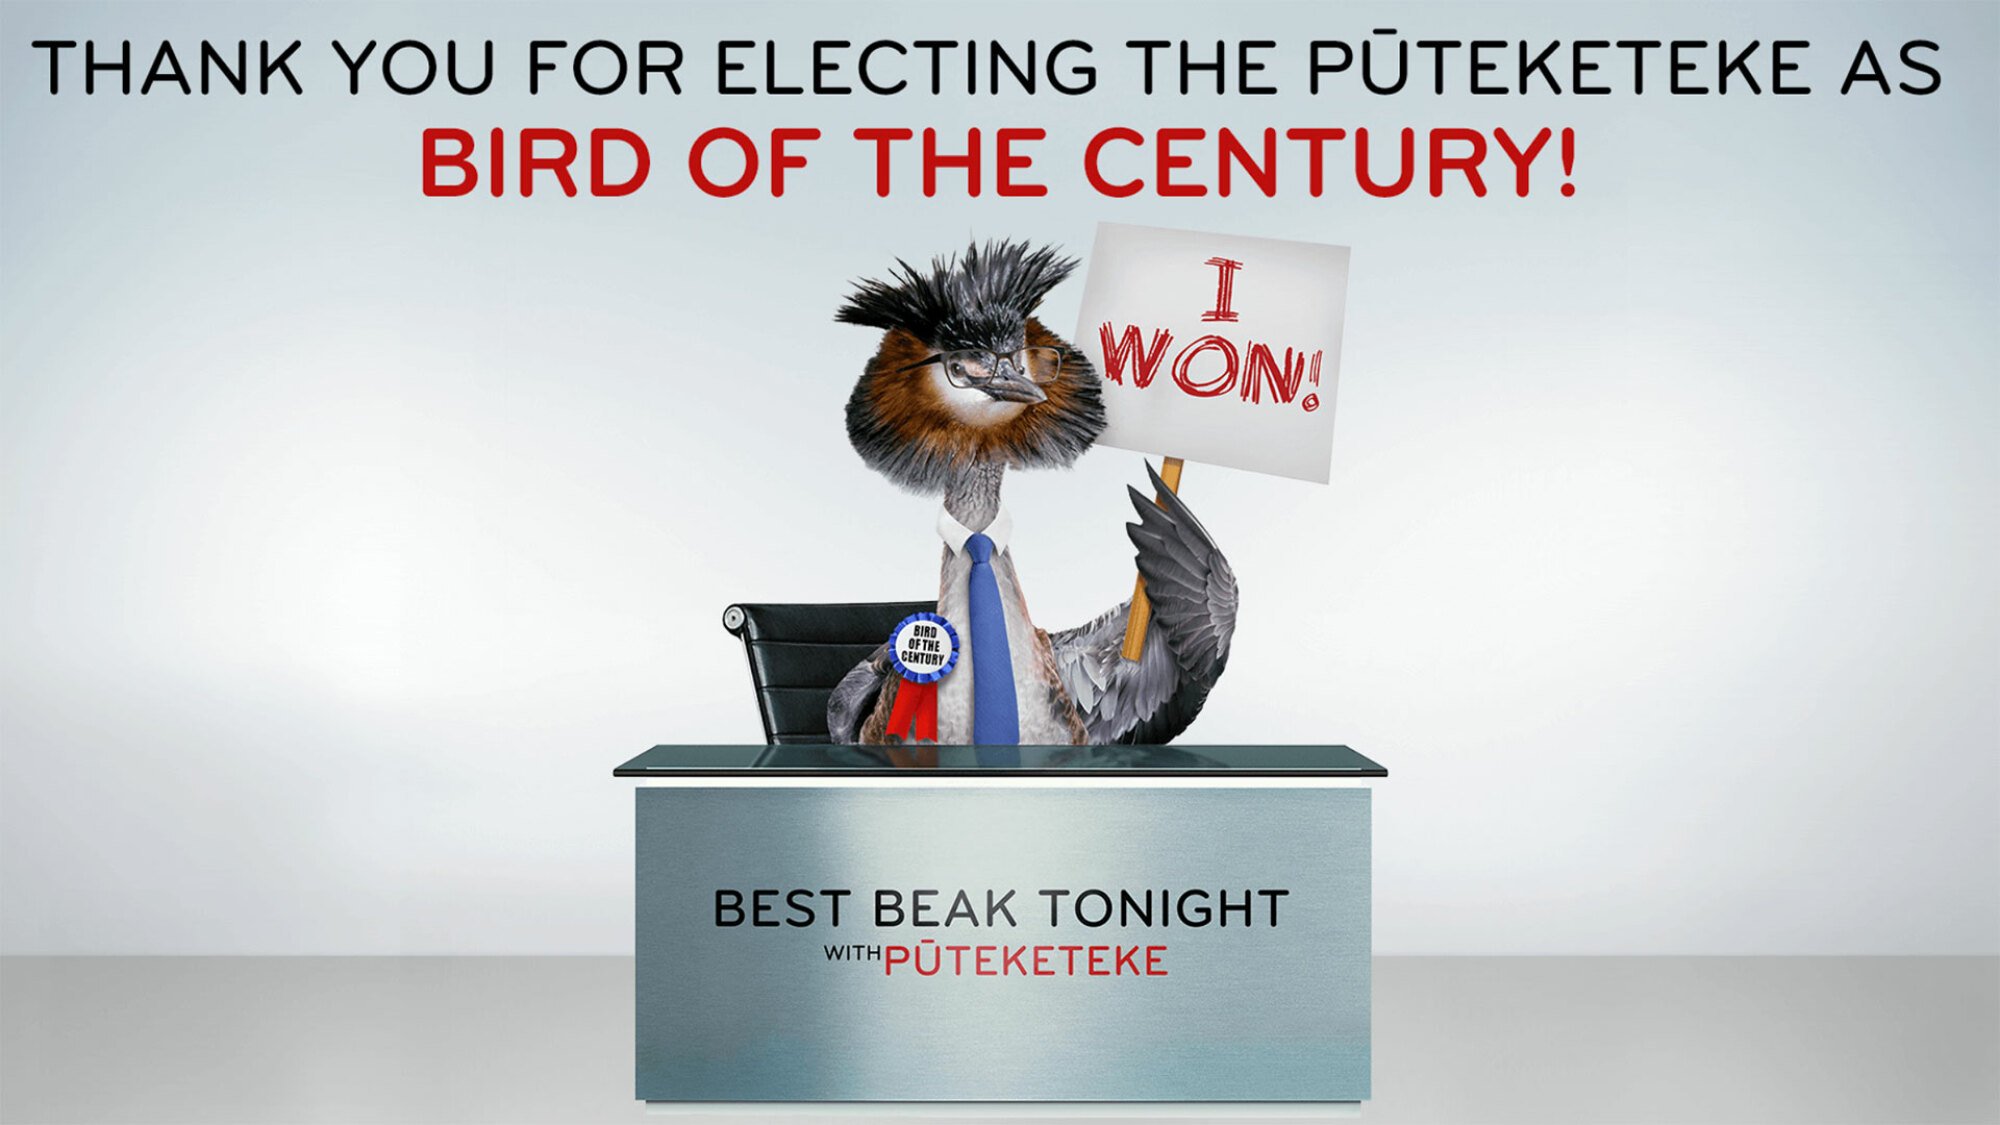 A photoshopped image thanks people for voting the Puteketeke as "Bird of the Century". The bird is shown styled as John Oliver, wearing glasses and sitting behind a desk while wielding an "I Won" sign.